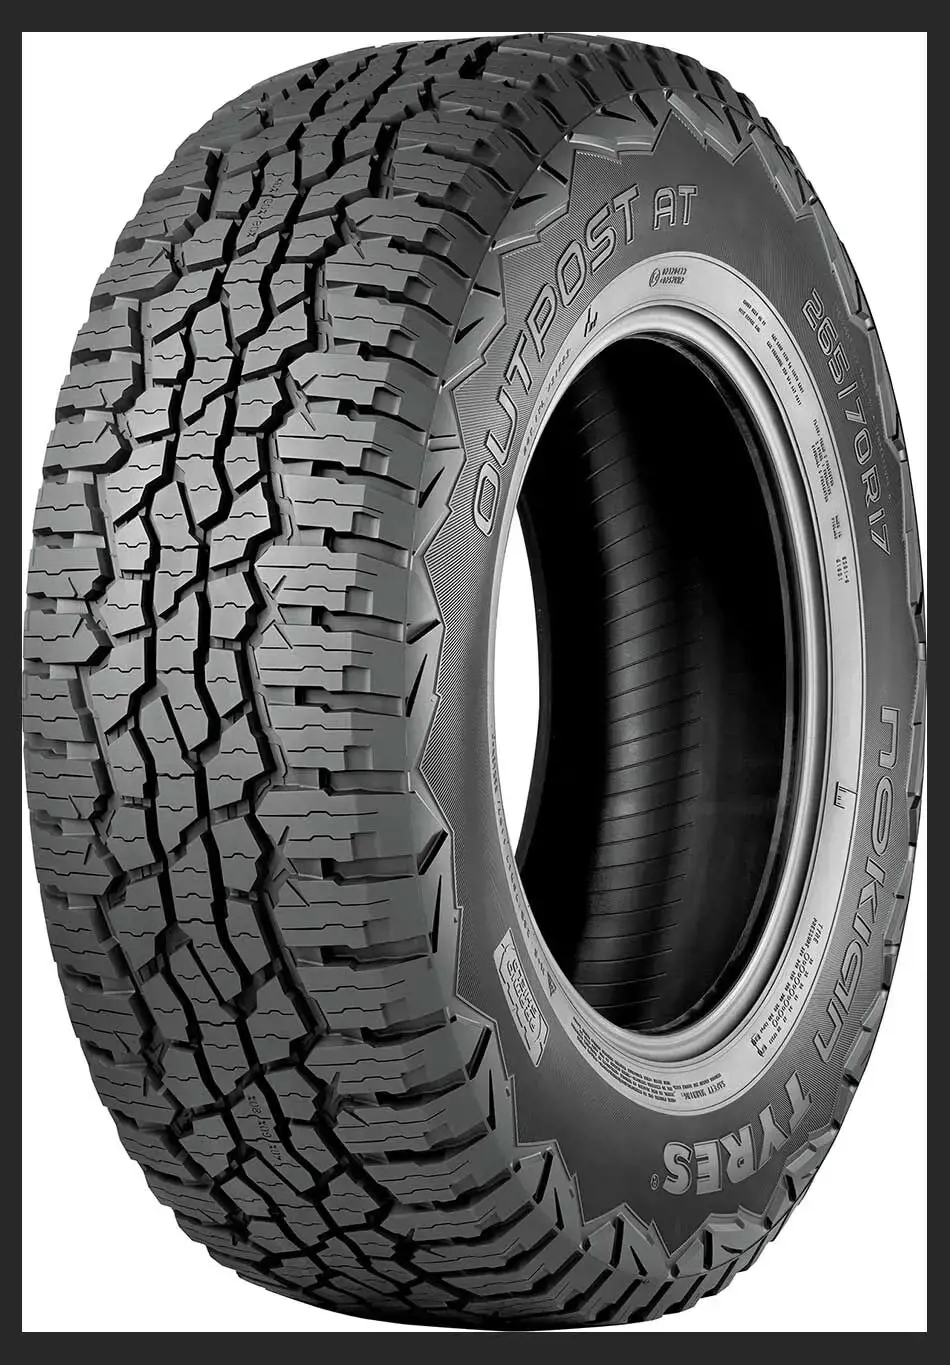 Outpost R20 Nokian AT 265/60 121S/118 Tyres